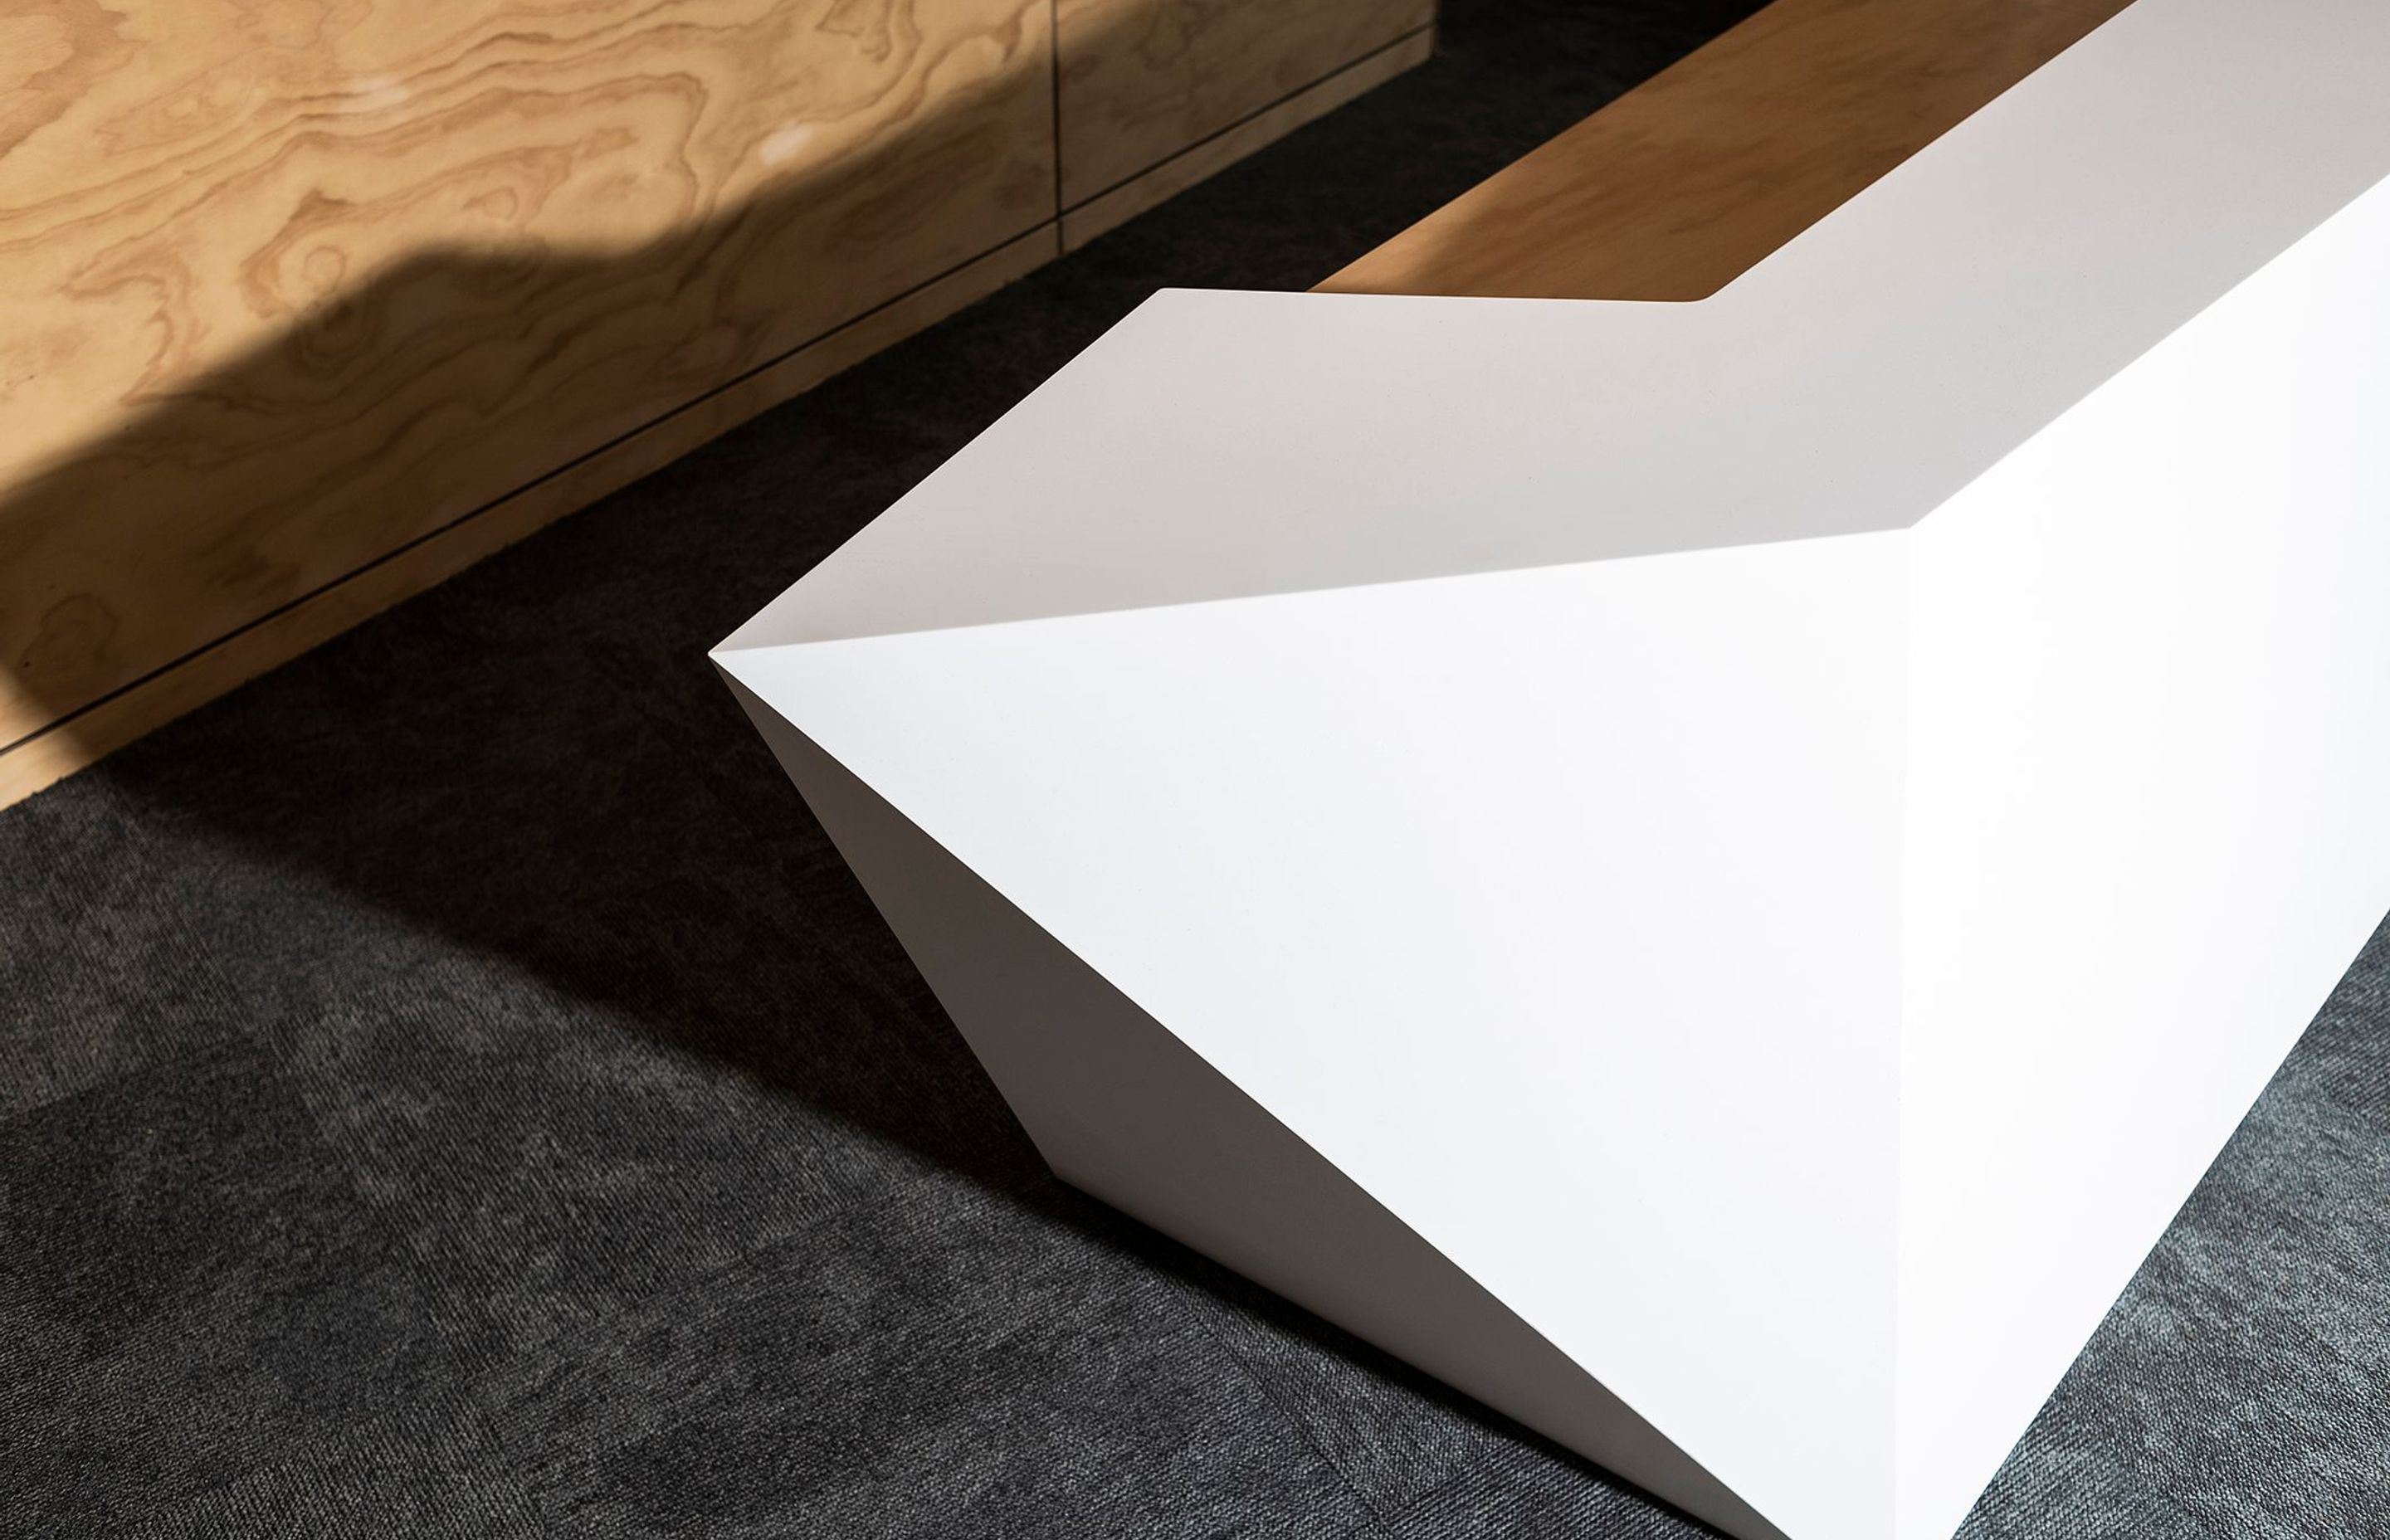 The striking geometric design of this reception counter was achieved by compound cutting nine sheets of Tavolo solid surface panels into the various component shapes, which were then seamlessly assembled into the finished product.